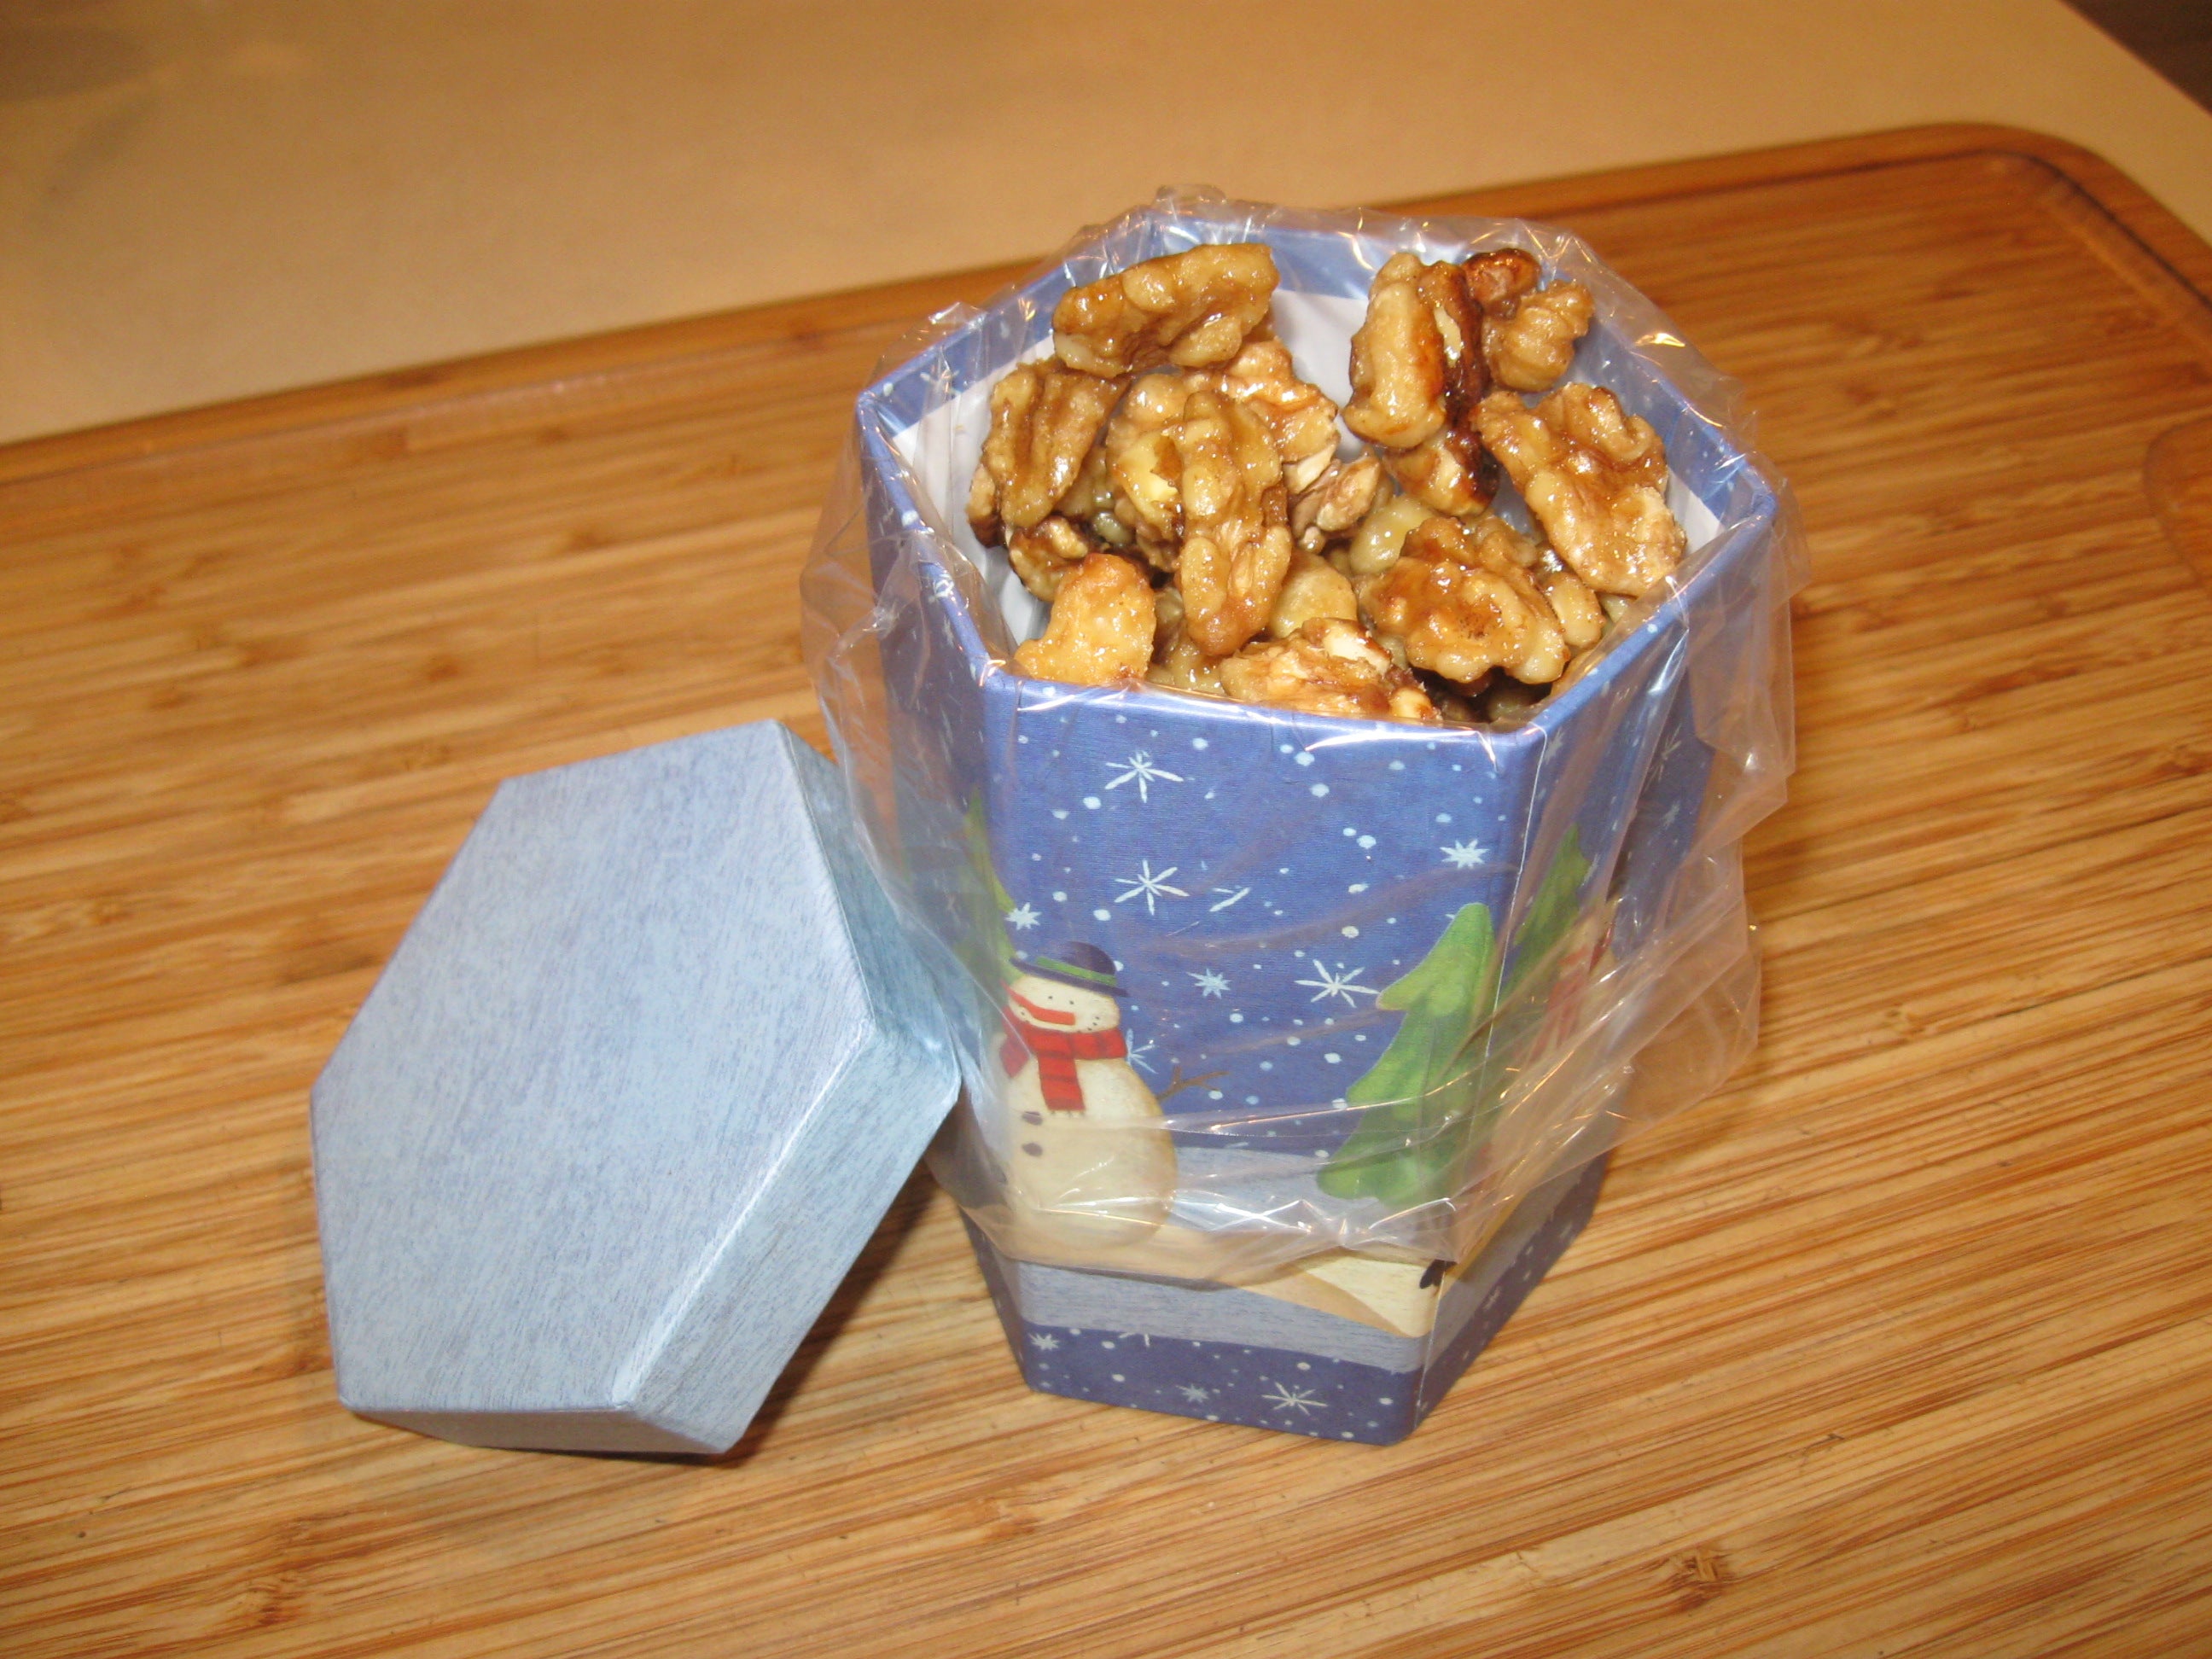 Finished Maple Glazed Walnuts in an attractive gift box